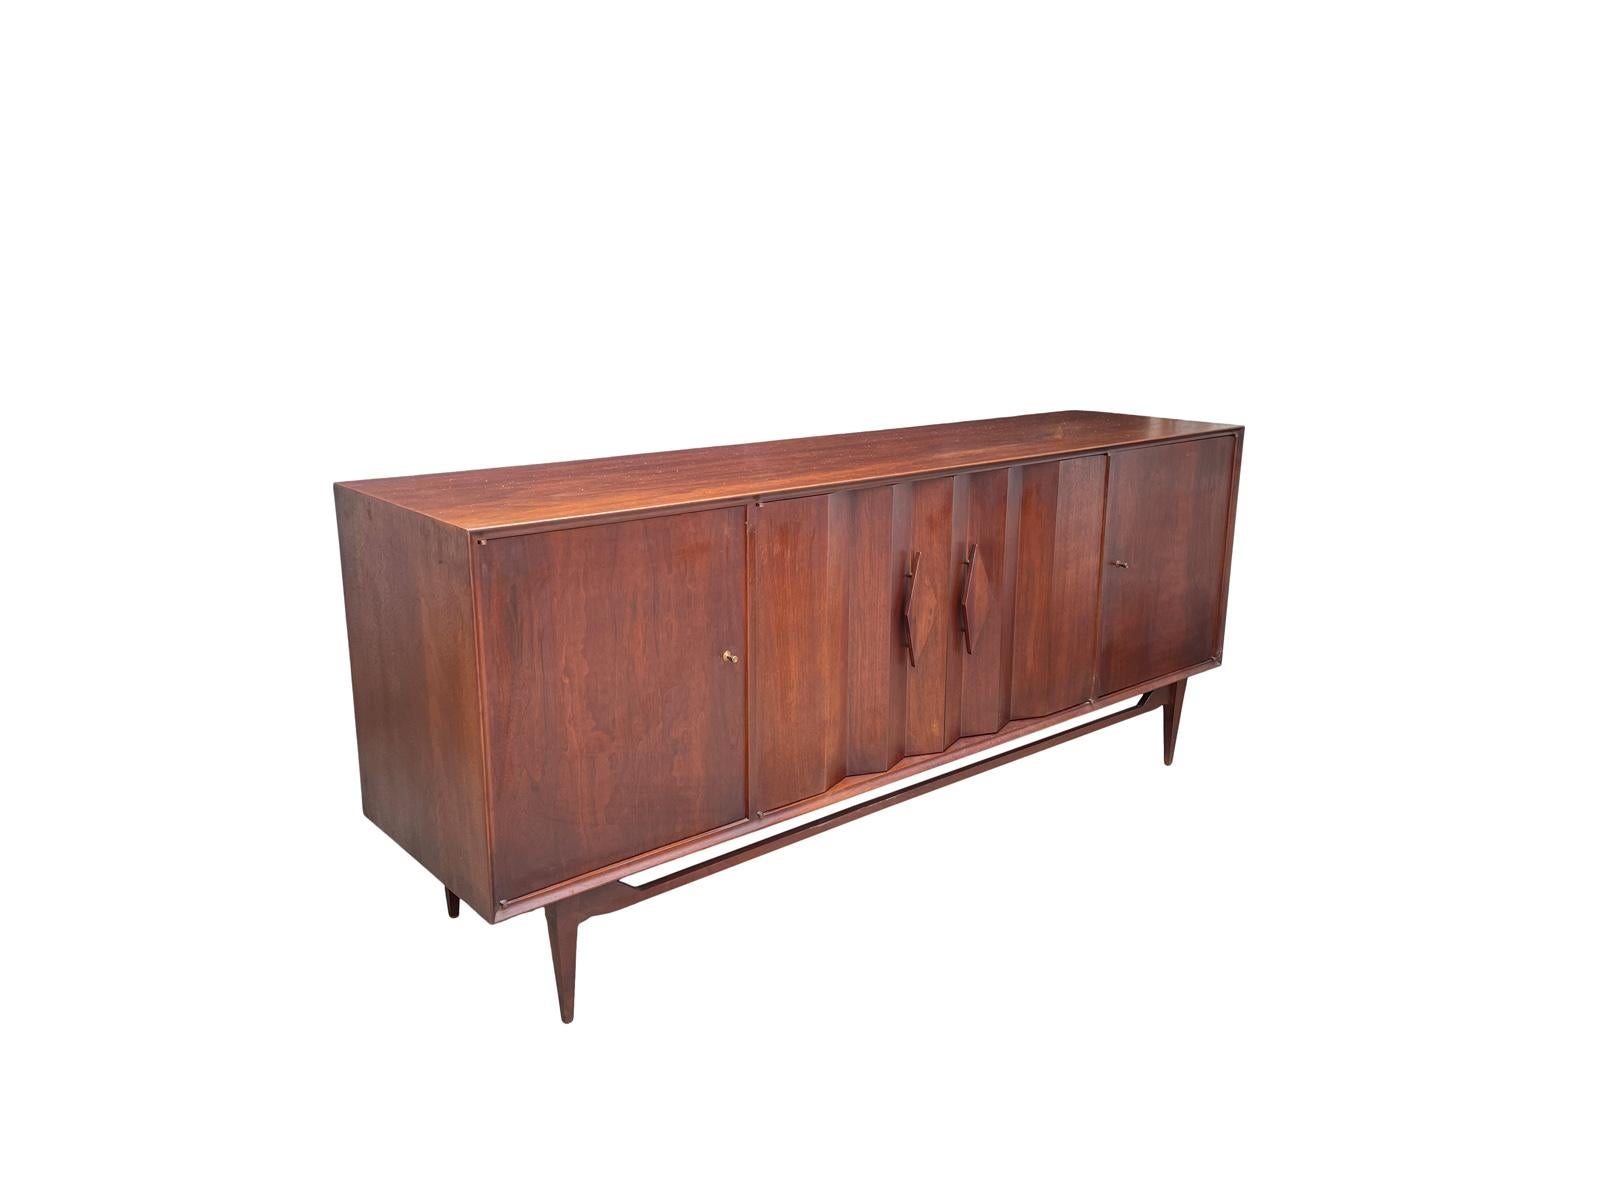 1960s Walnut Sculptured Front Credenza by Specialty Woodcraft  In Good Condition For Sale In Bensalem, PA